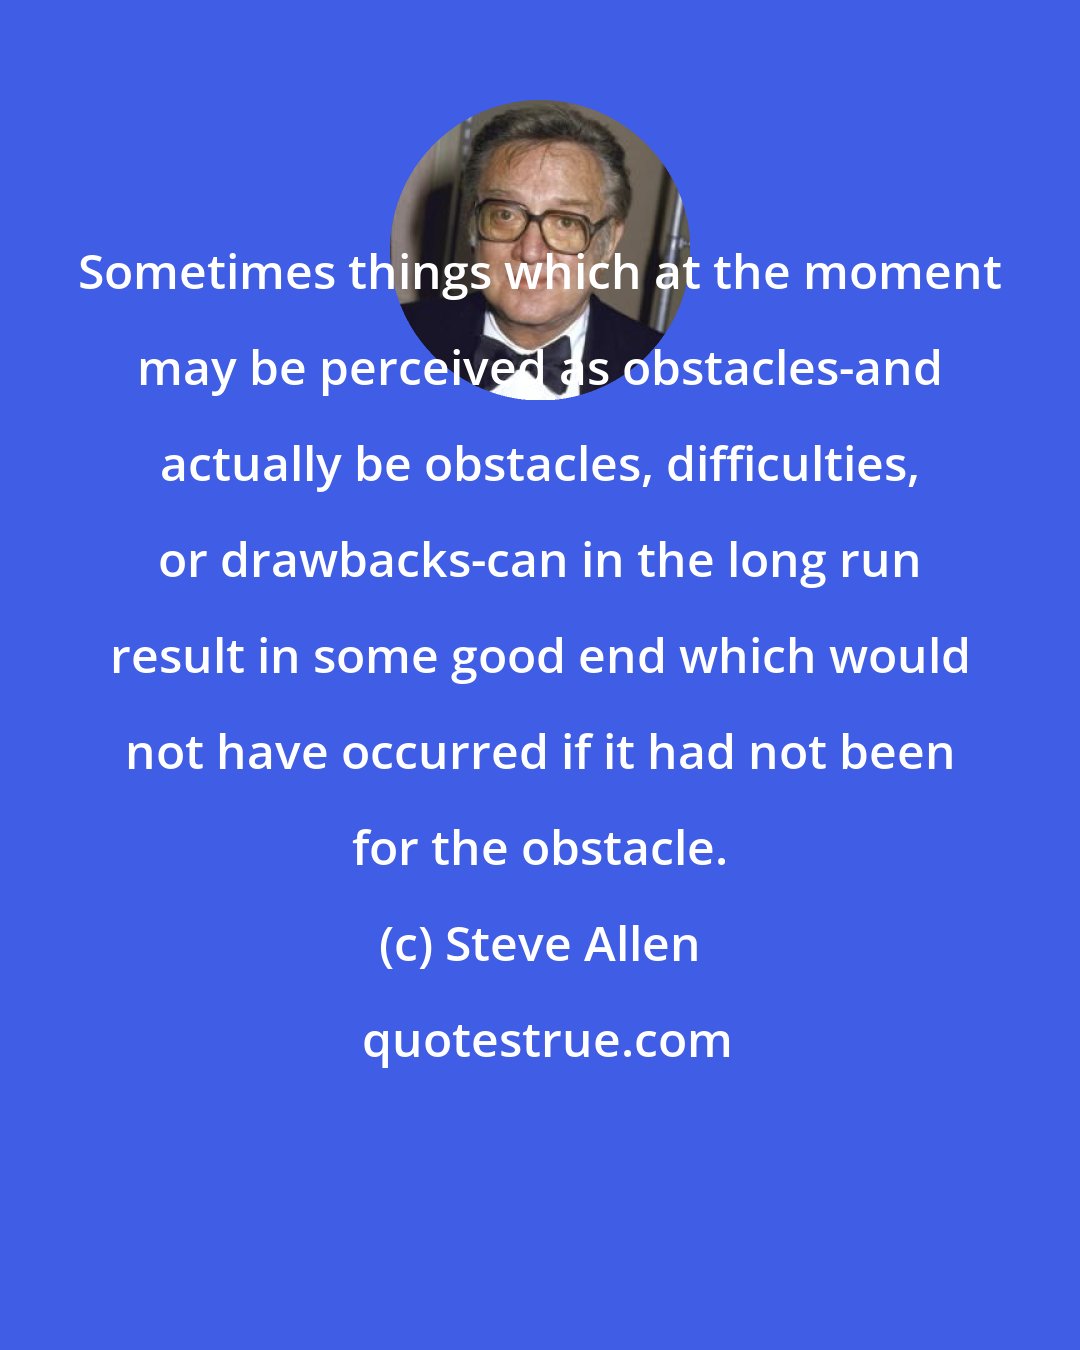 Steve Allen: Sometimes things which at the moment may be perceived as obstacles-and actually be obstacles, difficulties, or drawbacks-can in the long run result in some good end which would not have occurred if it had not been for the obstacle.